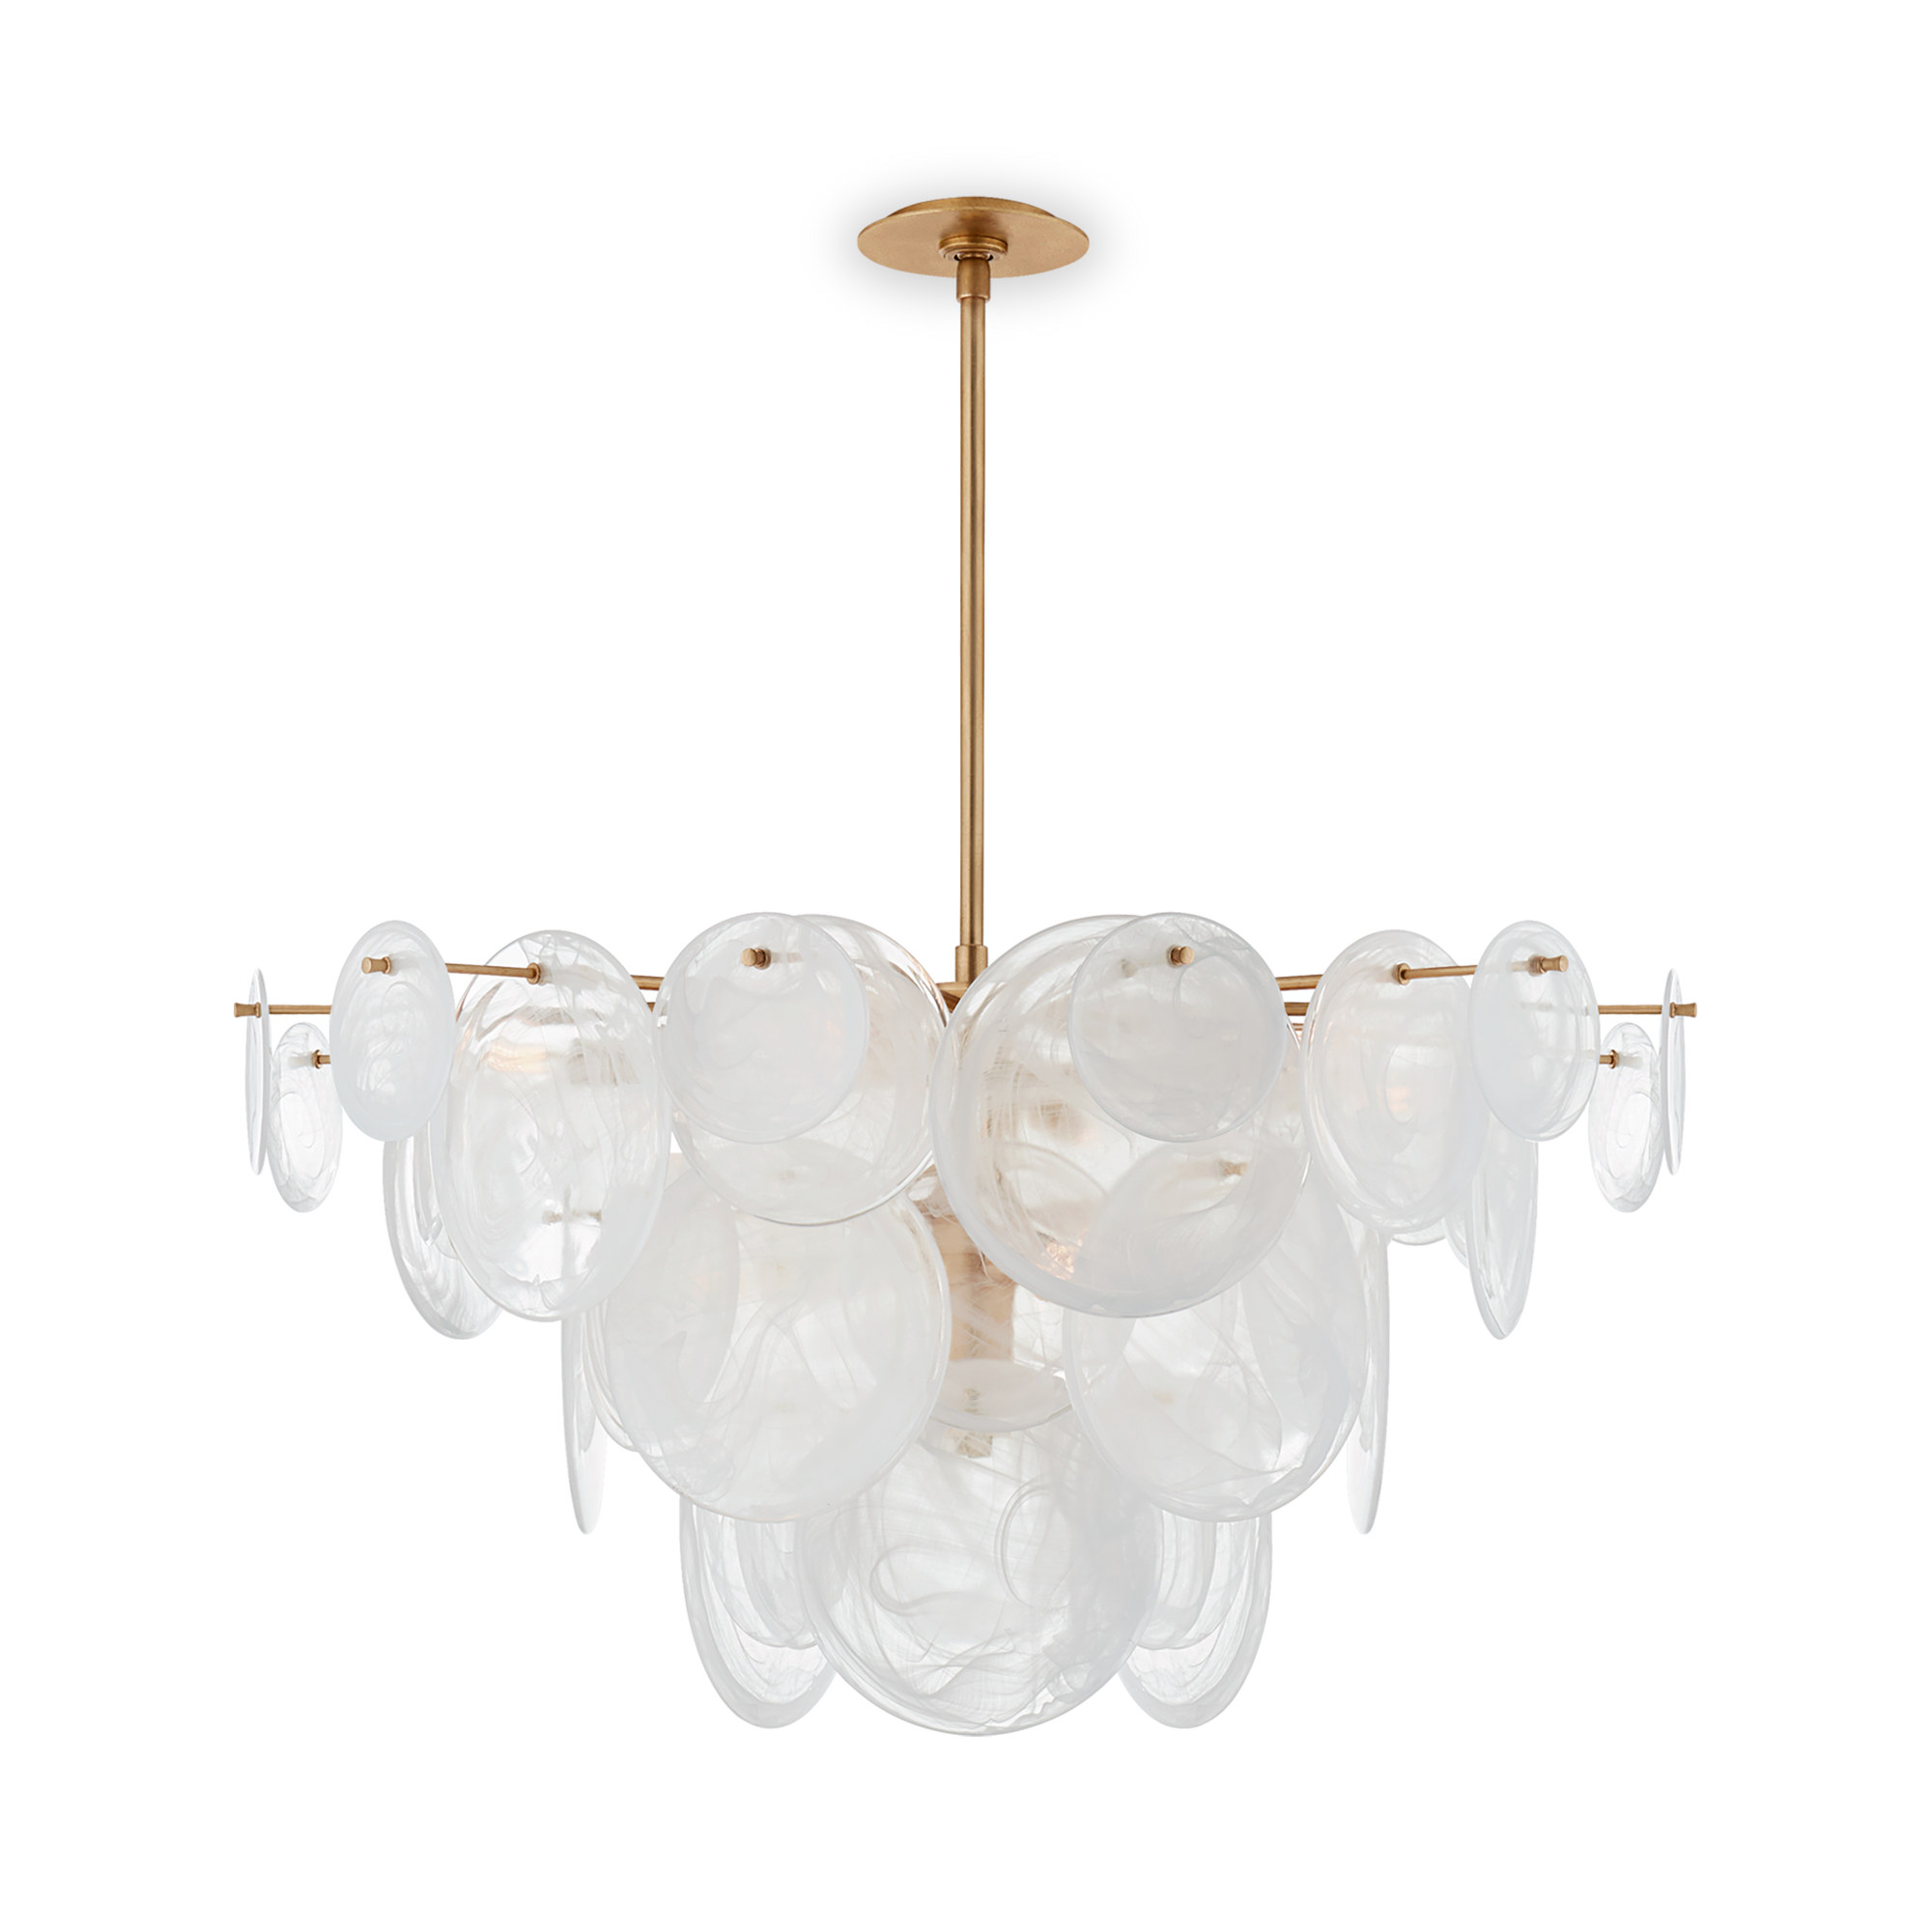 The Loire Medium Chandelier is inspired by old world glamour and European midcentury design.